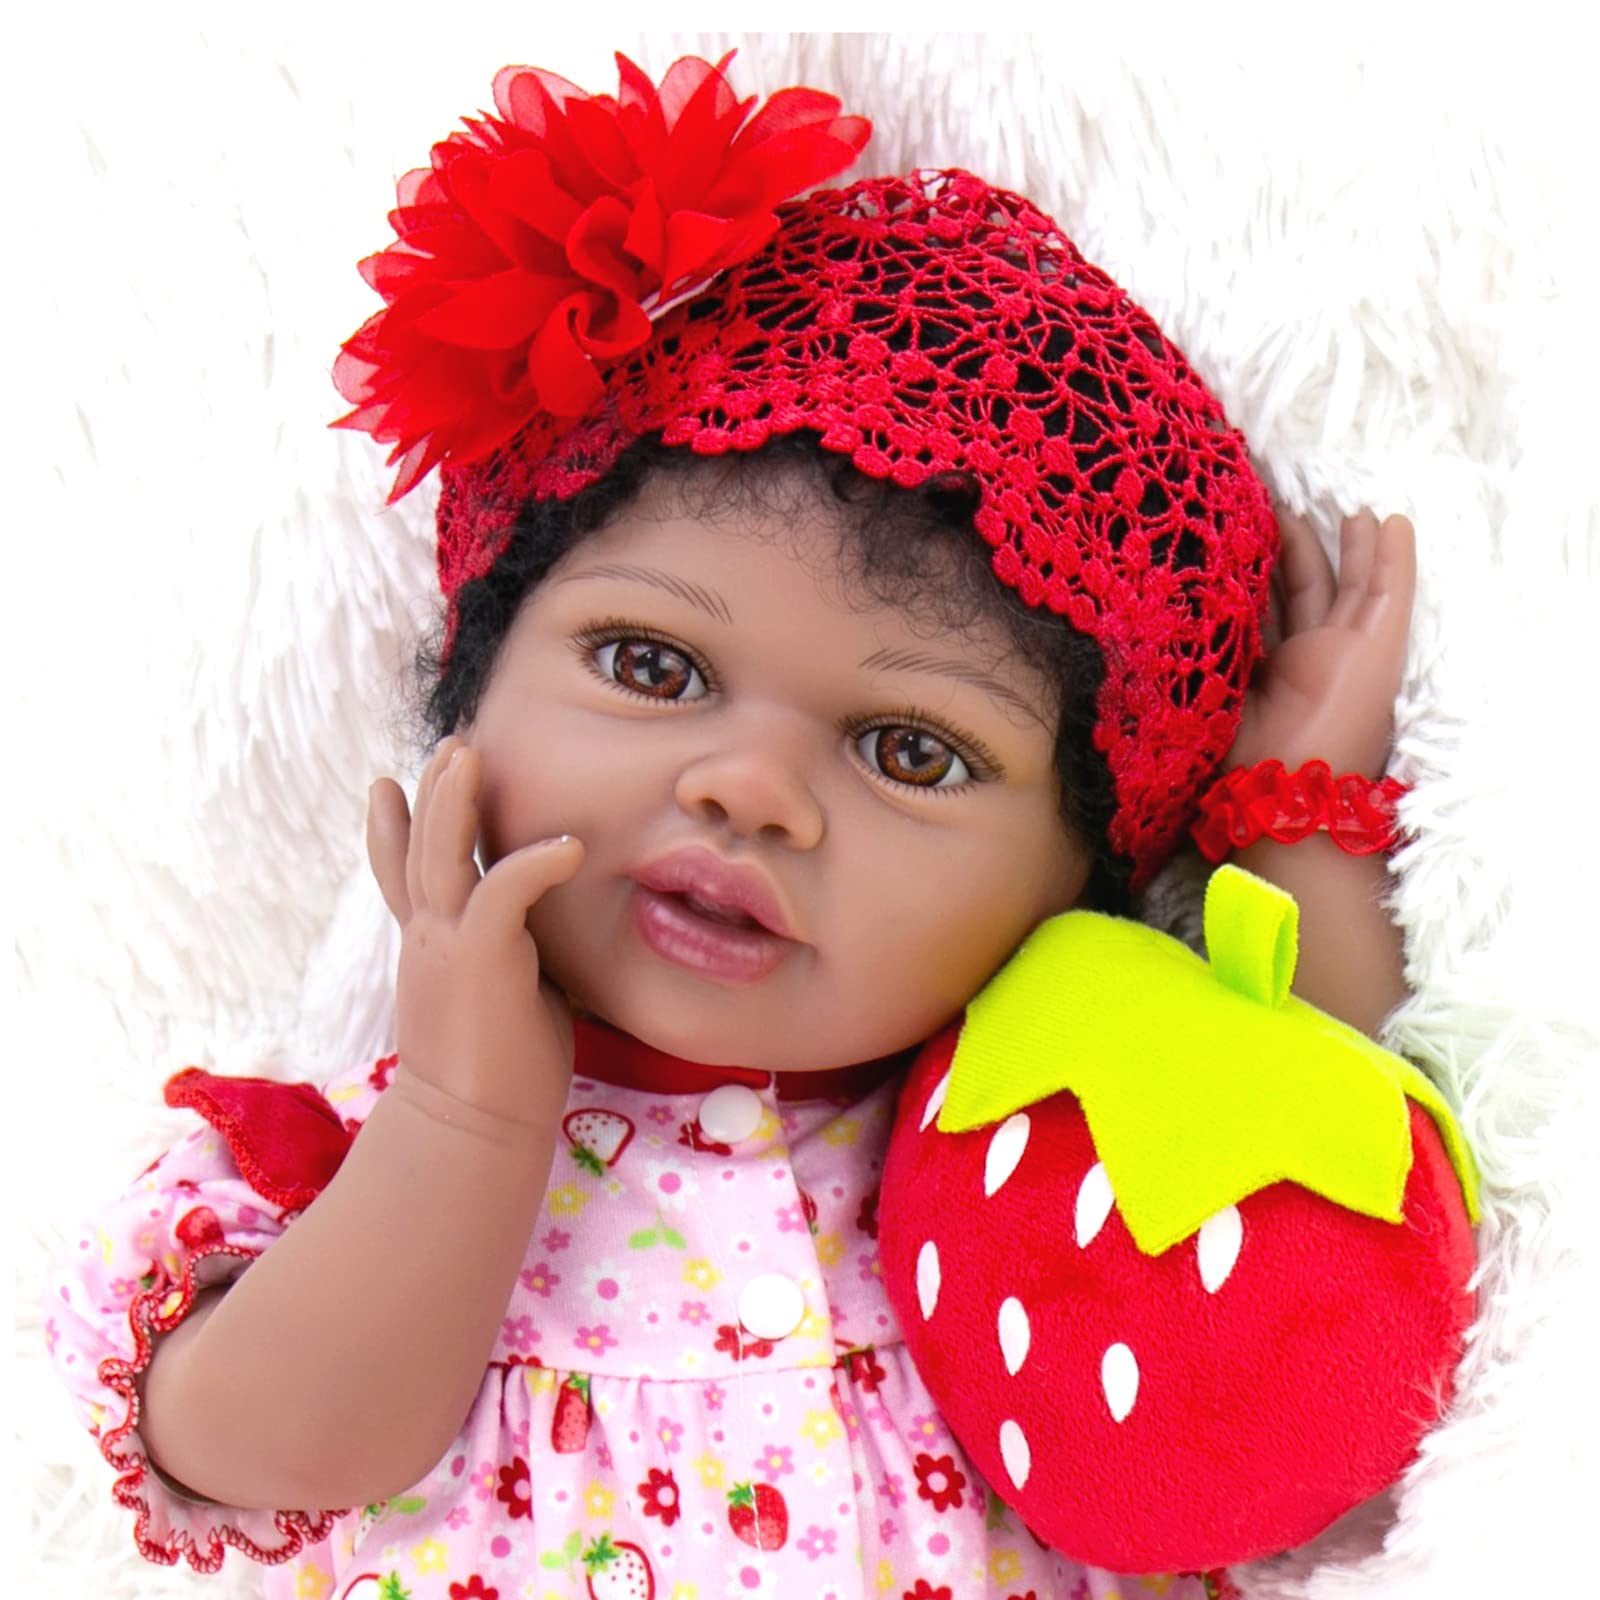 Aori Reborn Baby Dolls Lifelike Black 22 Inch Realistic African American Newborn Baby Girls That Look Real Body Weighted Soft Body Real Life Toddler Doll Strawberry Gift Set for Ages 3+